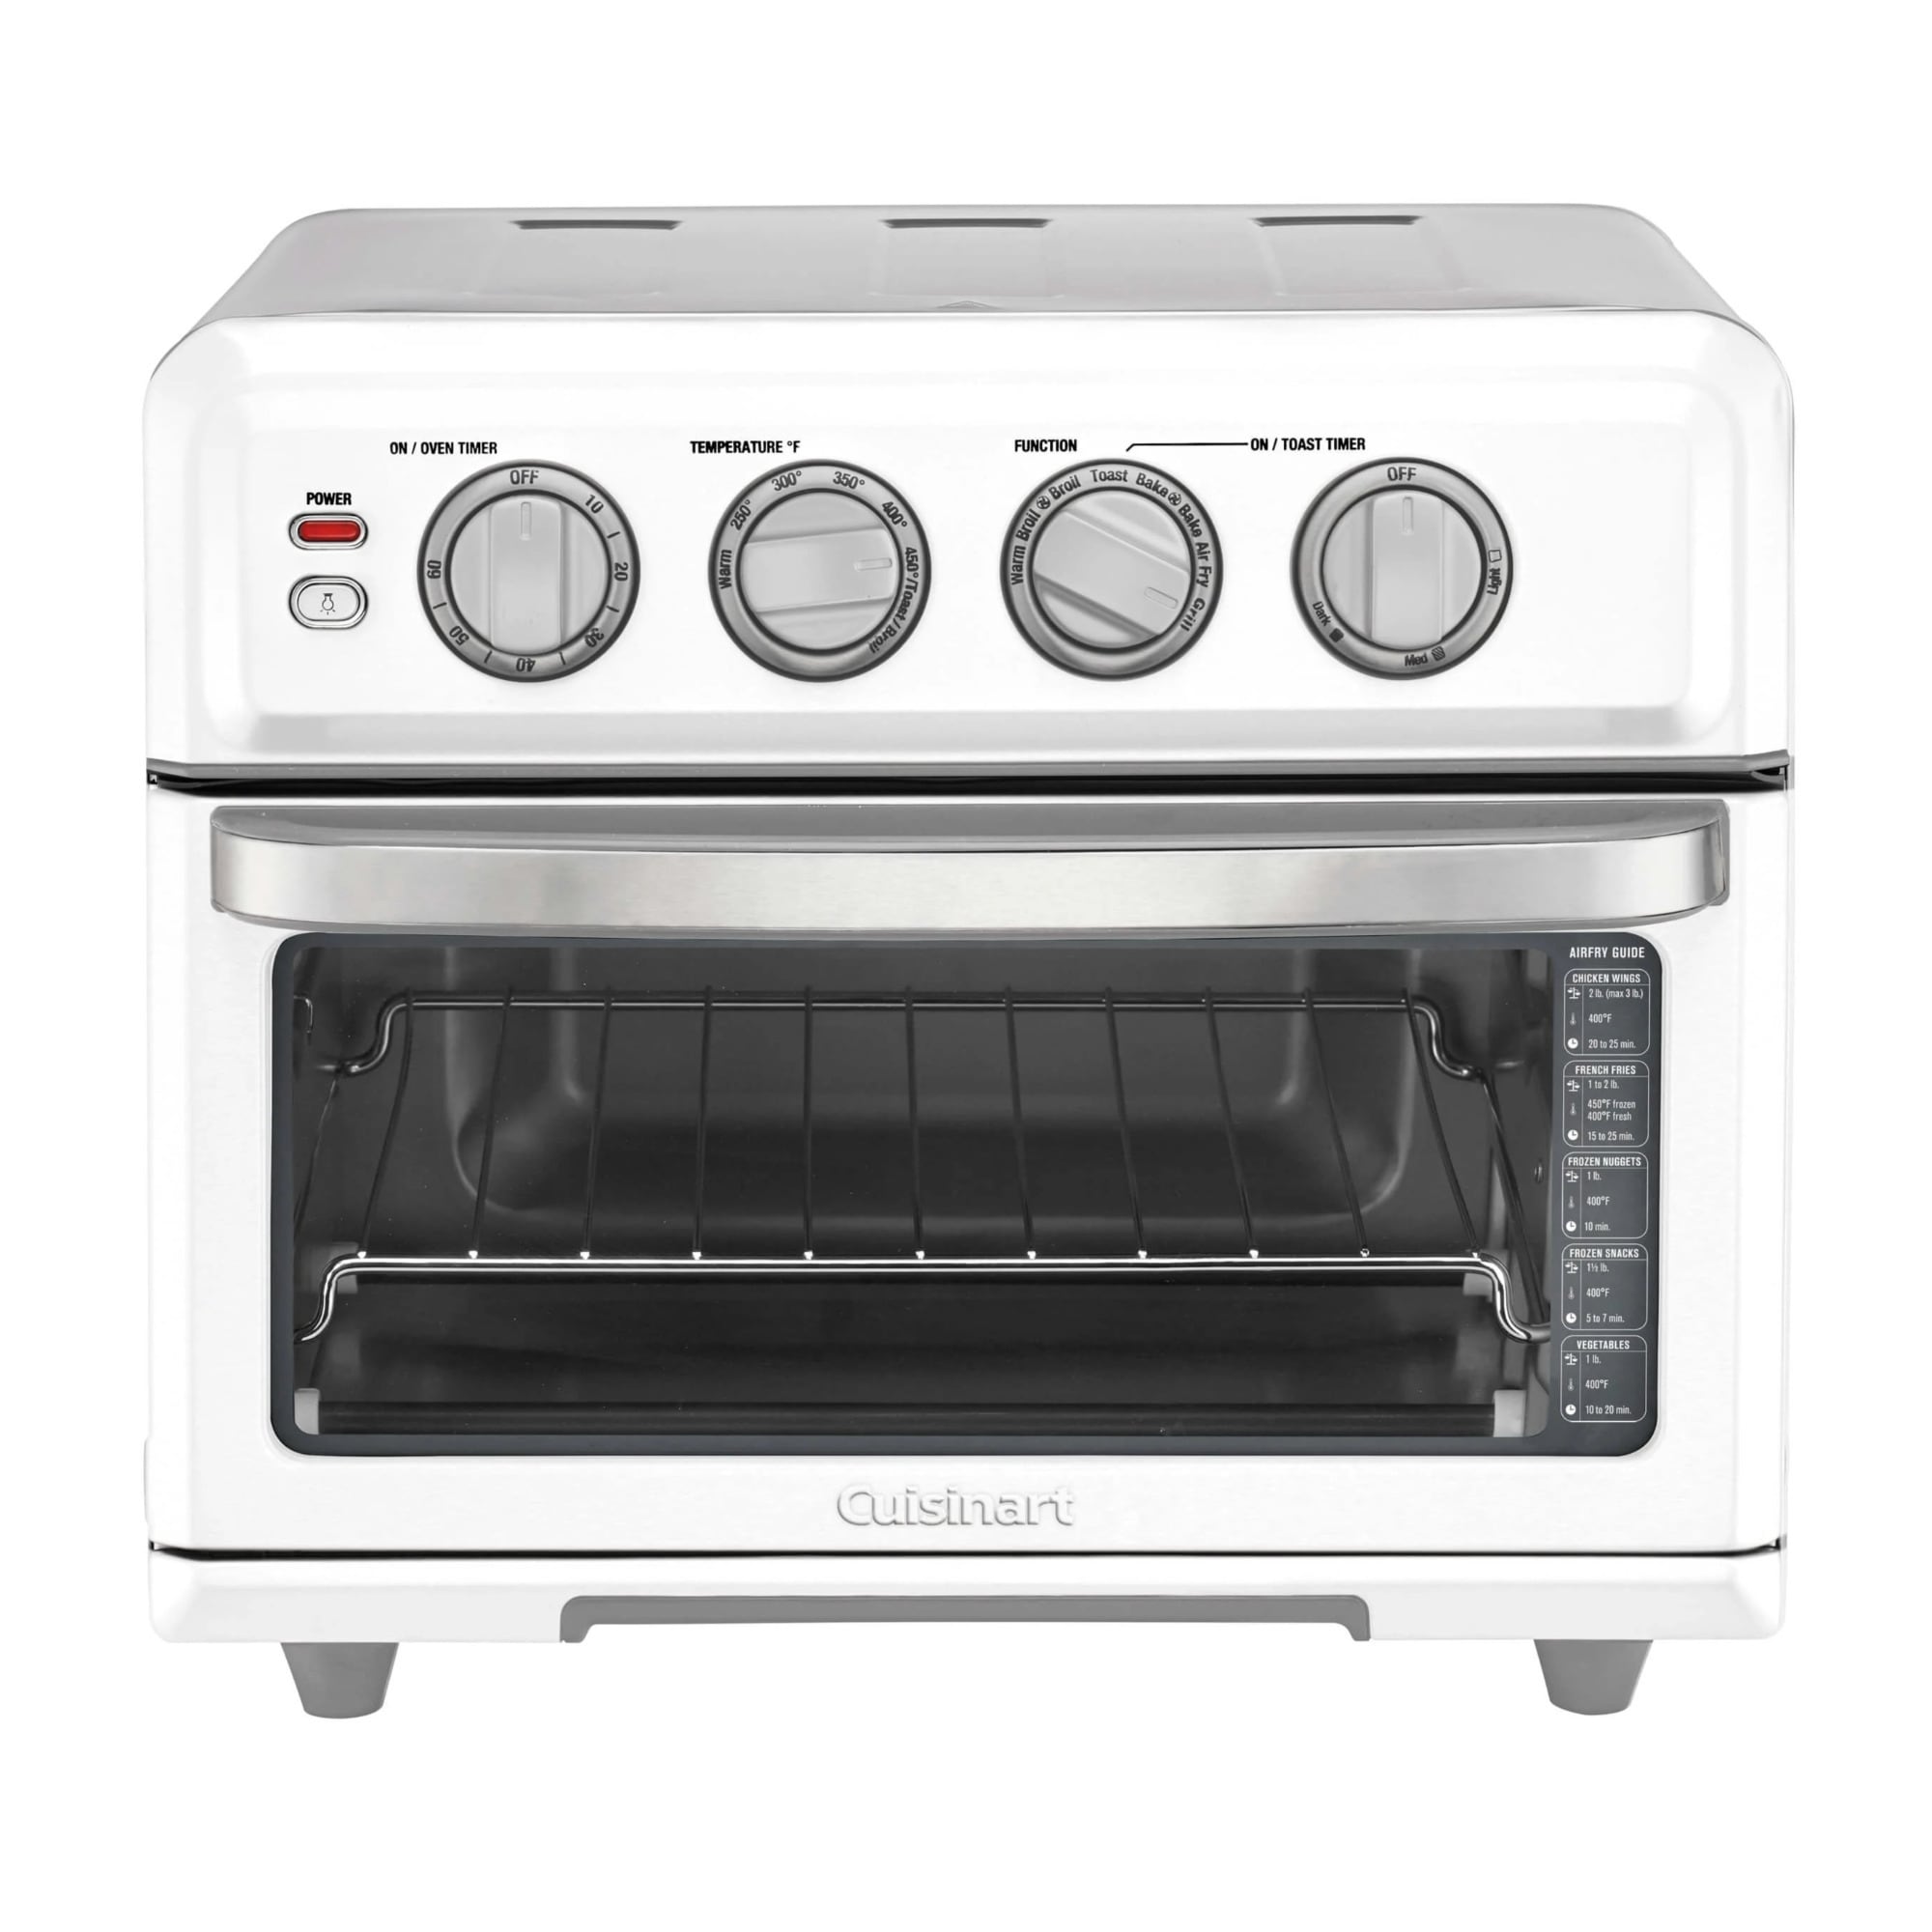 https://ak1.ostkcdn.com/images/products/is/images/direct/154bf9092ff1db337292cc25a19af6fda1ac8e0f/Cuisinart-Airfryer-Toaster-Oven-with-Grill-%28White%29.jpg